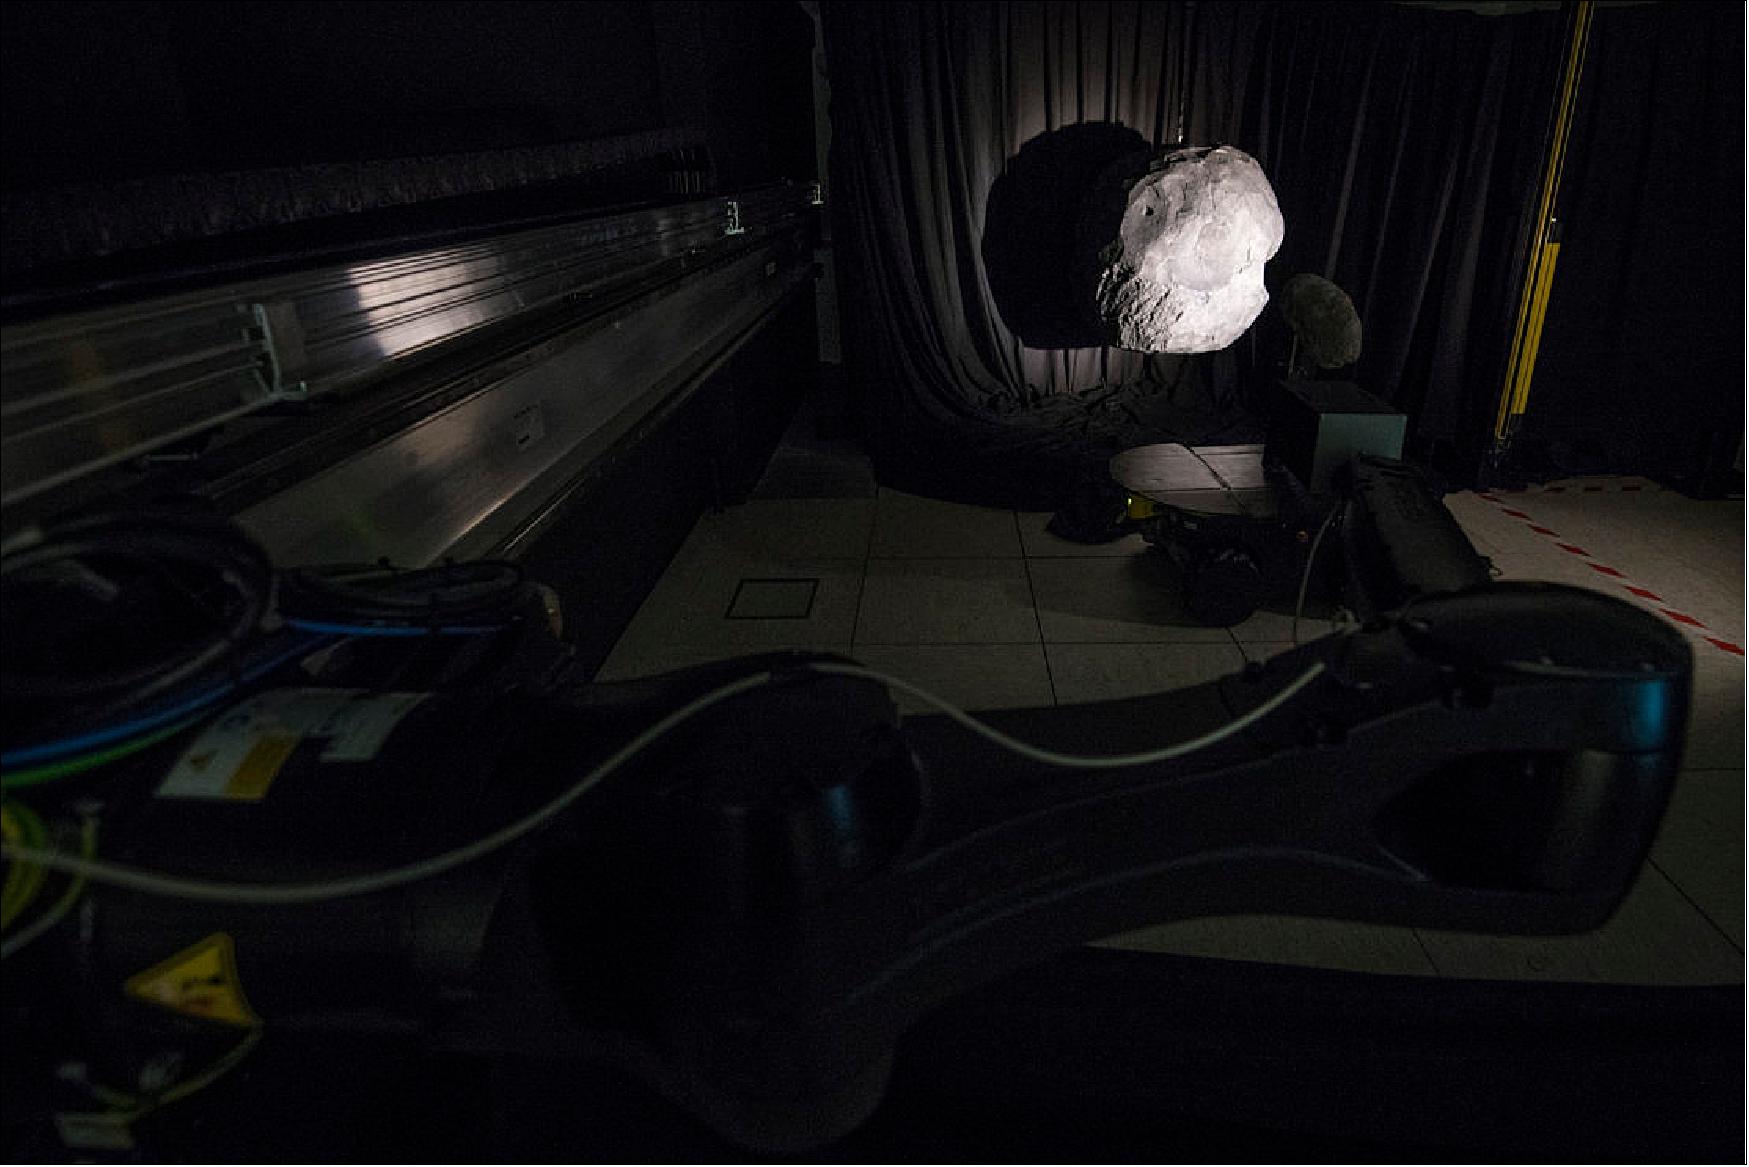 Figure 55: A camera, mounted on a robot arm that moves along a 33-m long track, approaches a pair of 3D-printed asteroid models. To simulate space, the chamber is kept dark for the testing, except for a single Sun-like light source (image credit: ESA–G. Porter, CC BY-SA 3.0 IGO)